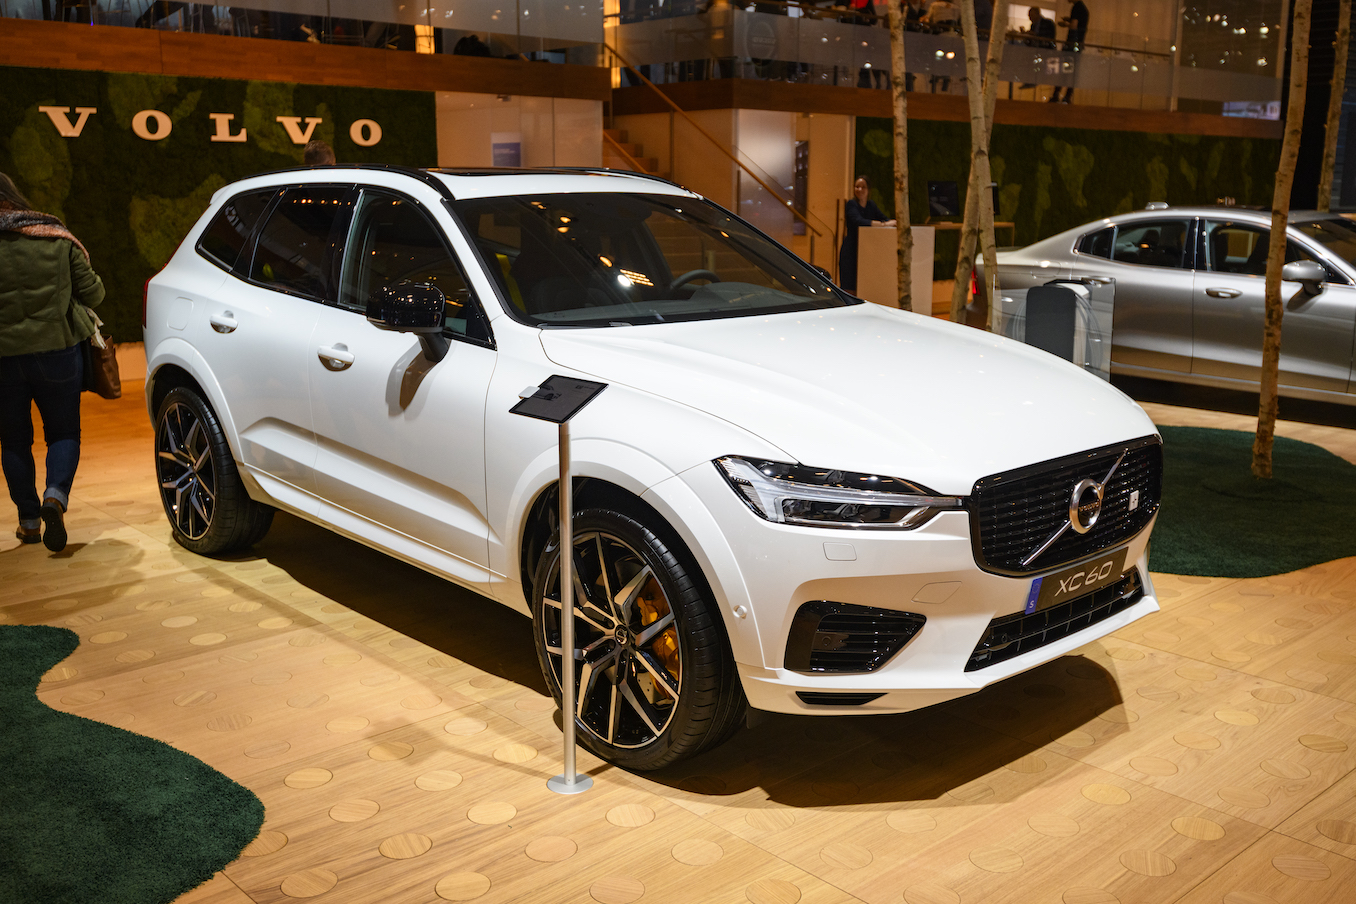 A white 2020 XC60 crossover SUV car on display at Brussels Expo